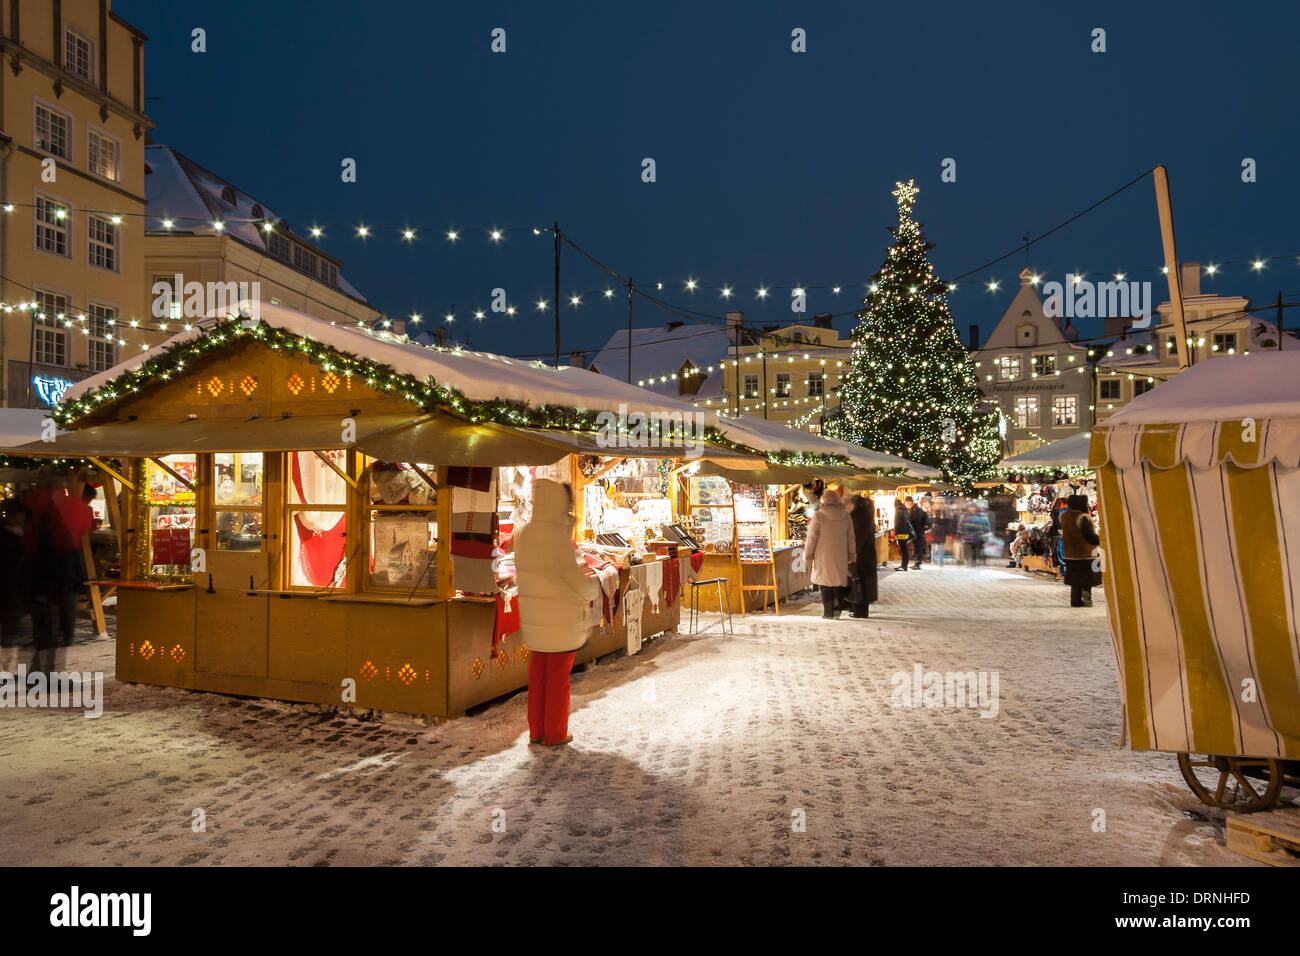 Christmas market at town hall square in the Old Town of Tallinn, Estonia Stock Photo